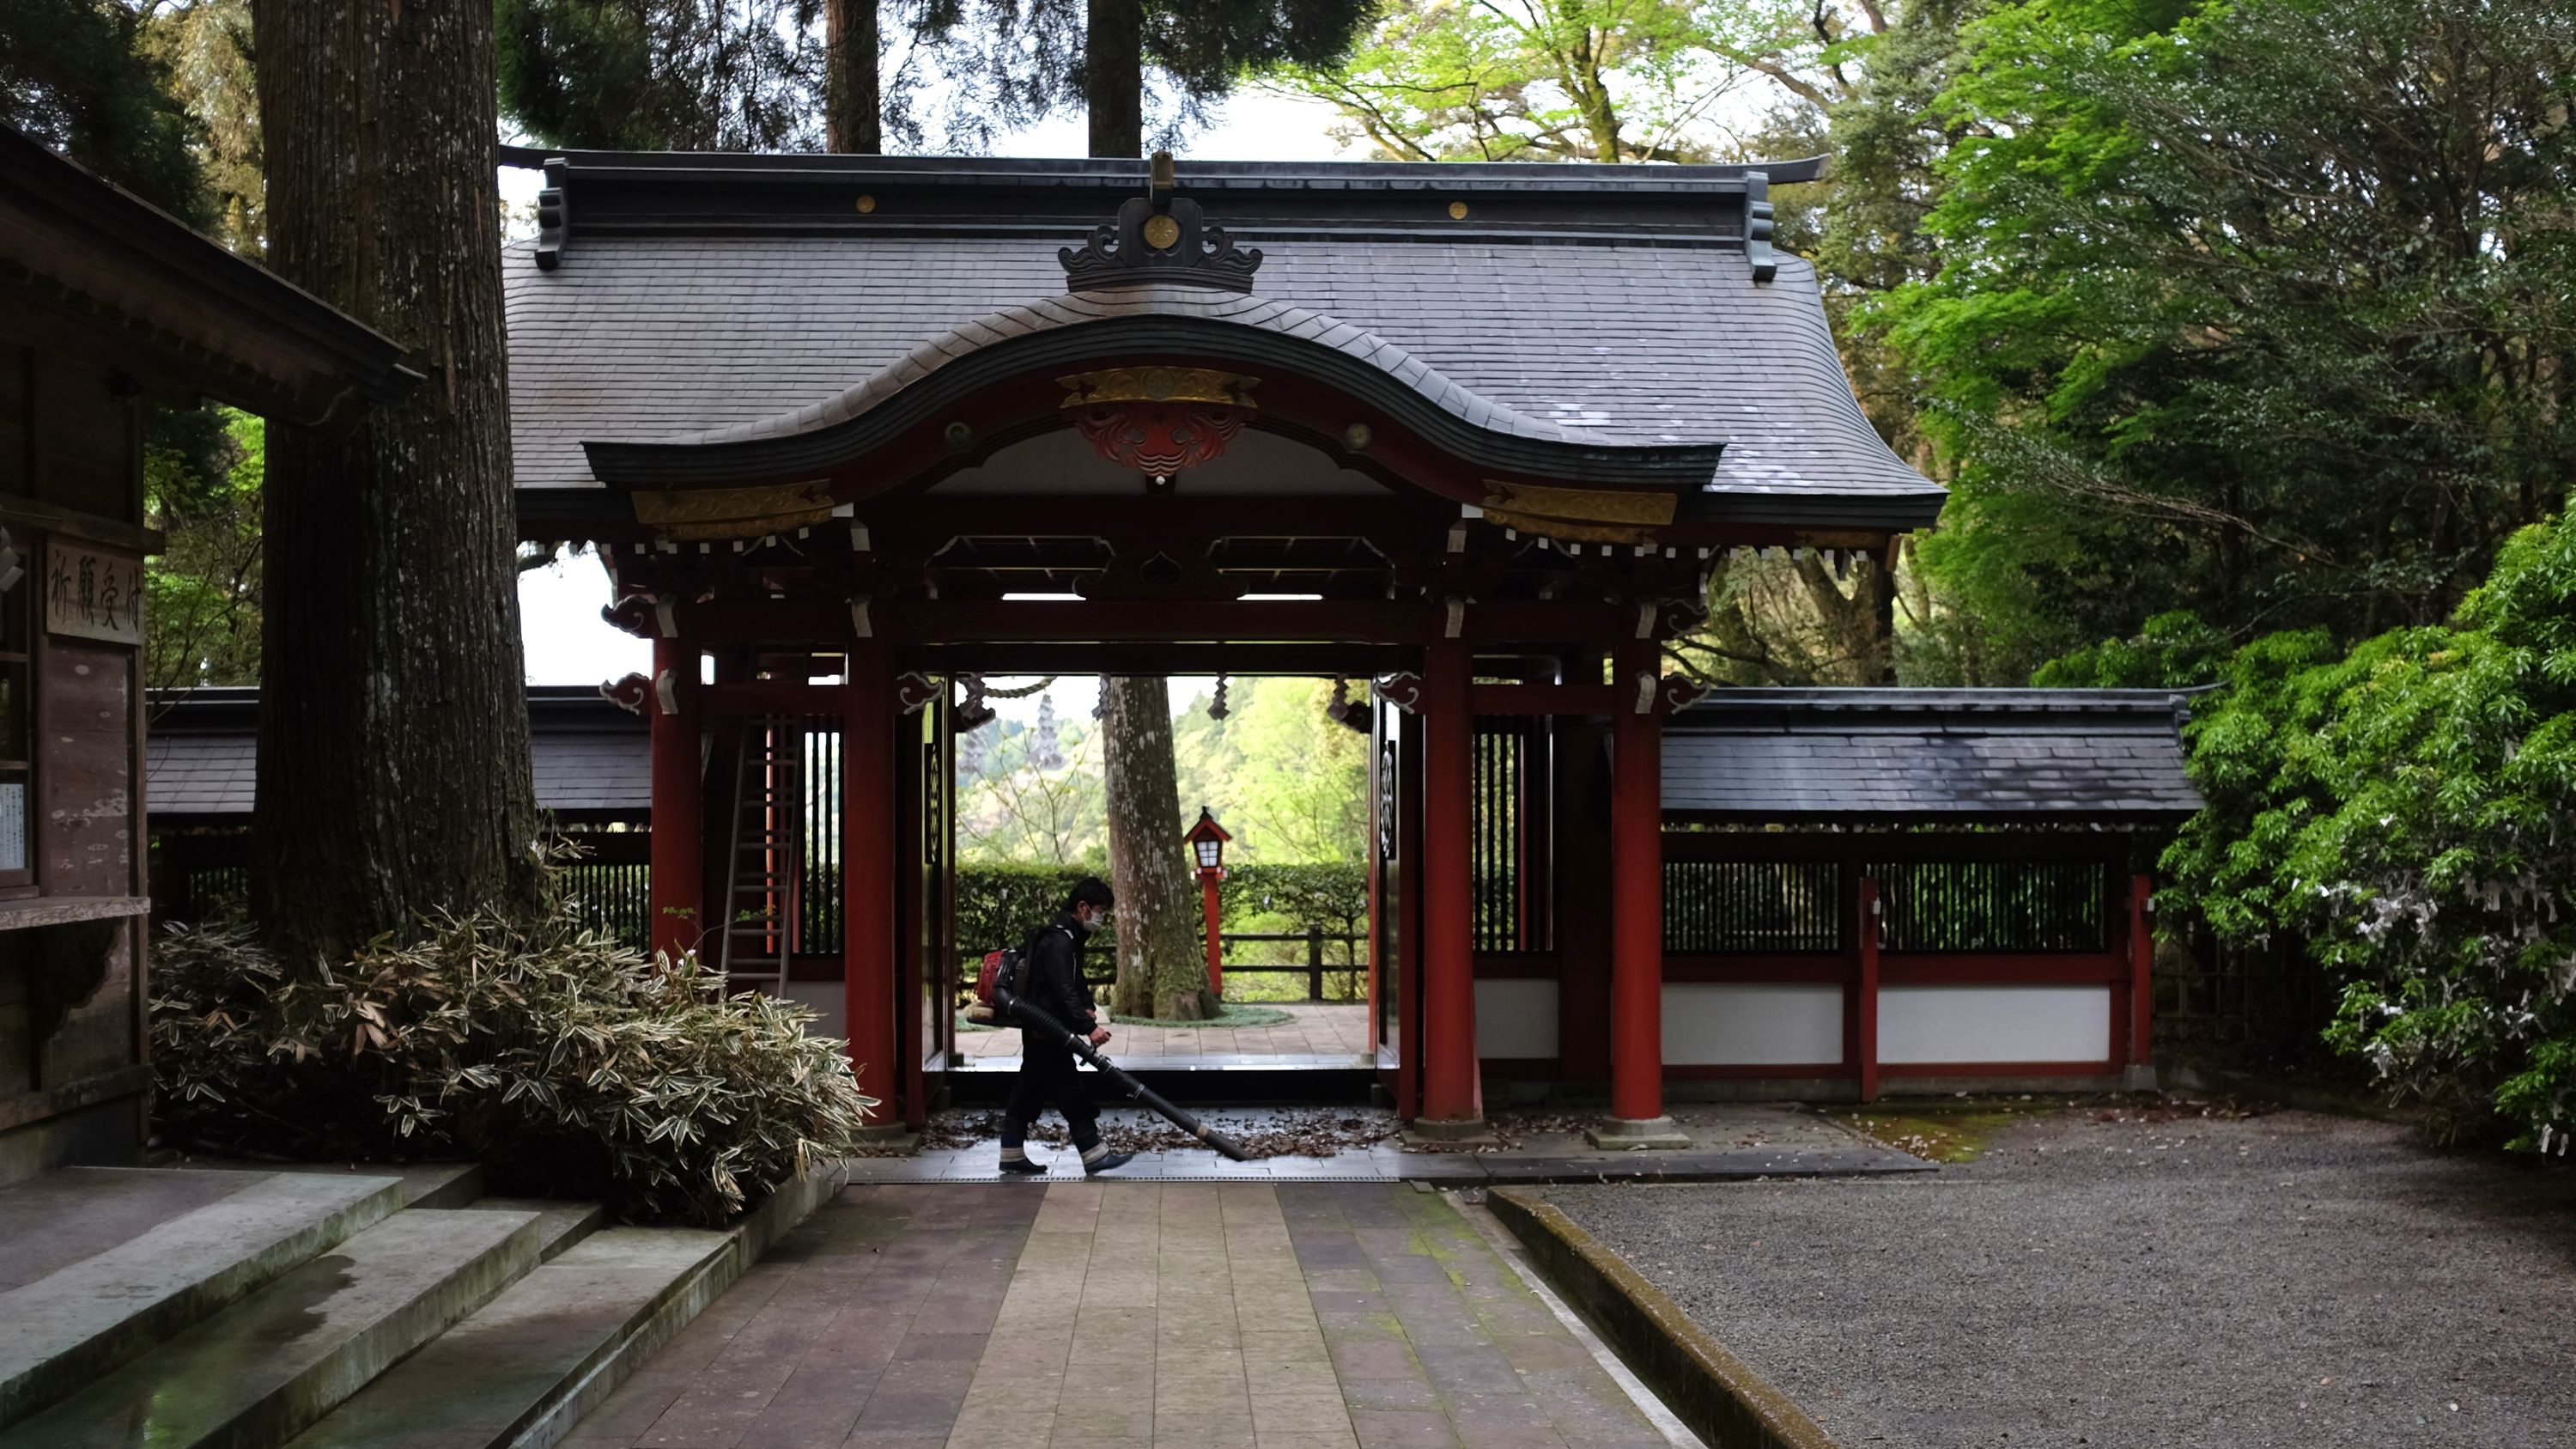 A groundskeeper working with a leafblower walks across the large gate of a Shinto shrine.